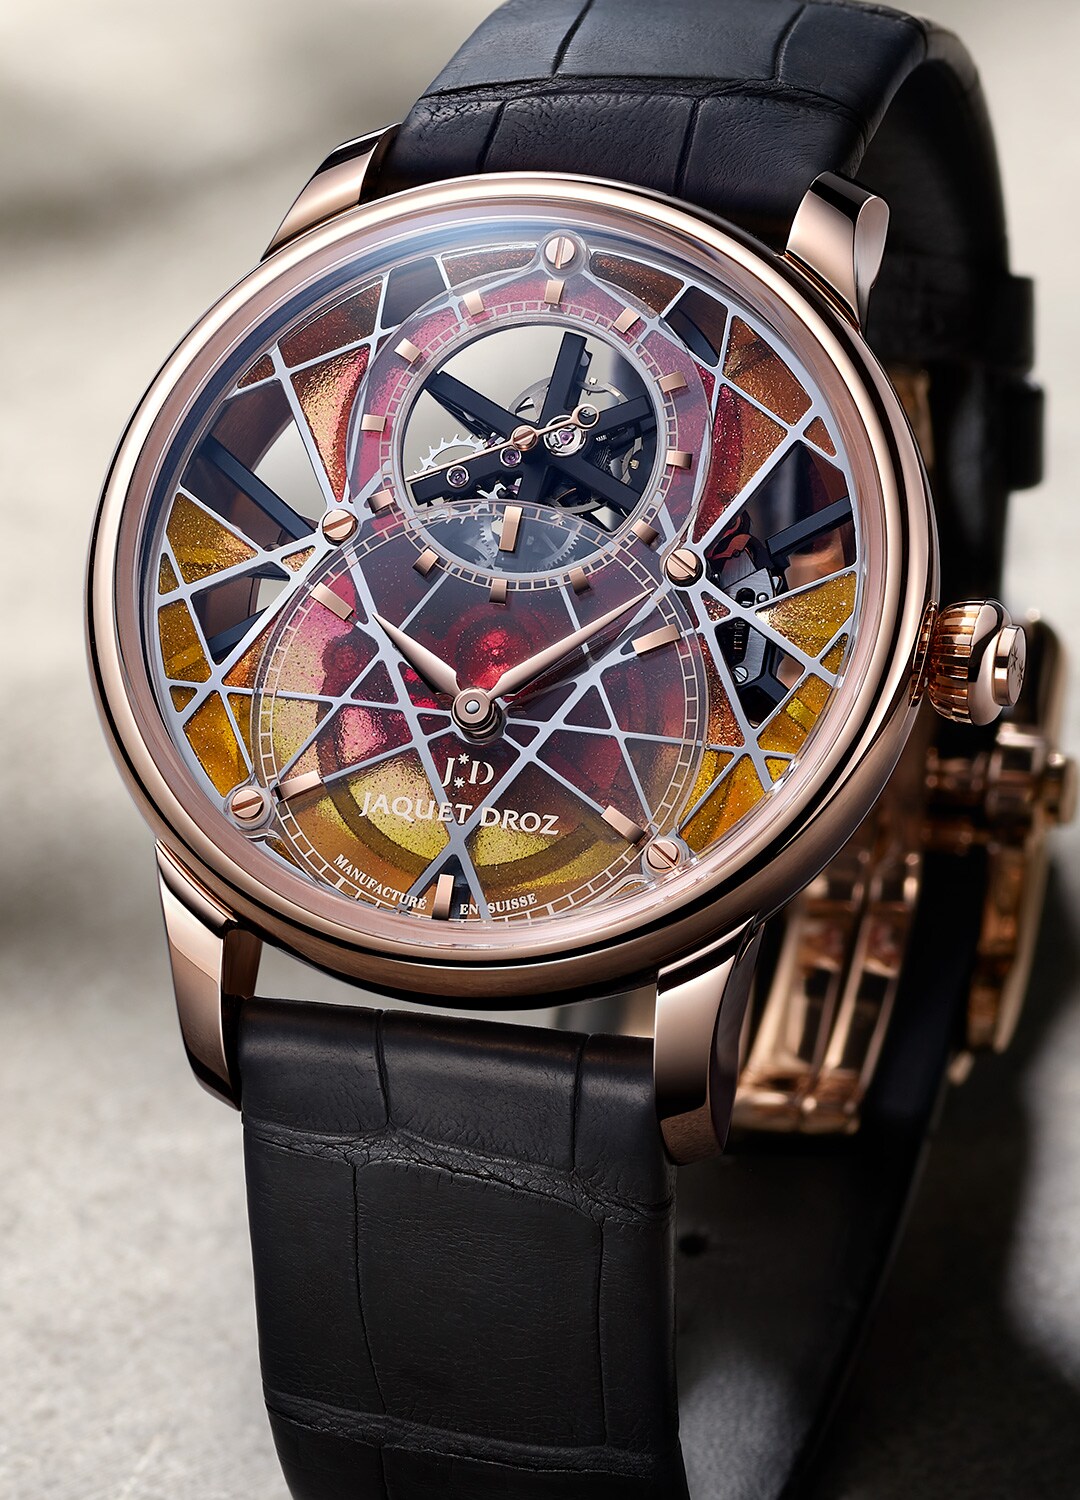 Grande Seconde Tourbillon Skelet-One Only Watch”